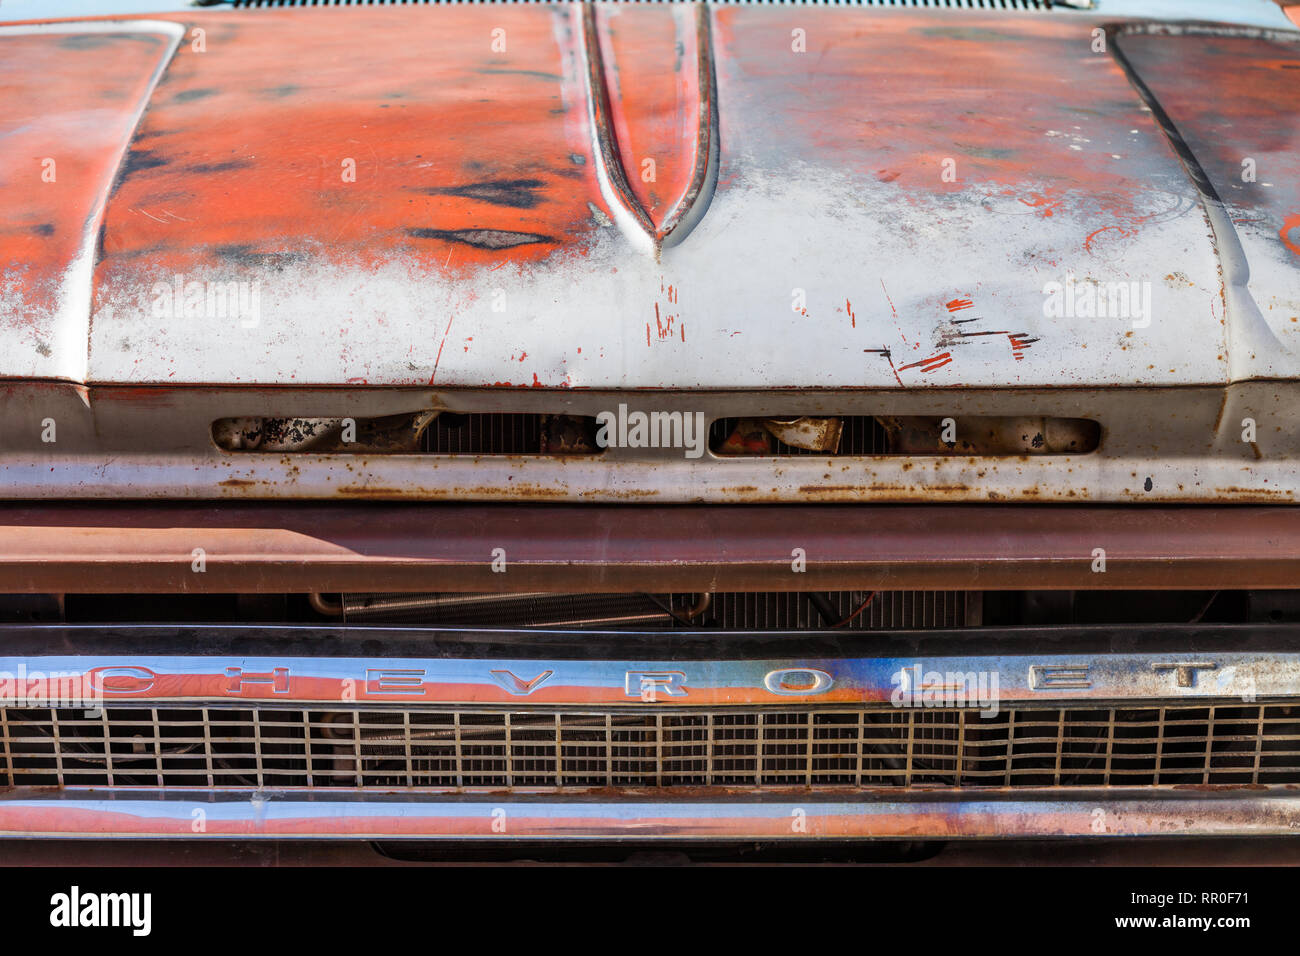 Abstract image of the hood of an old Chevrolet pick-up truck Stock Photo